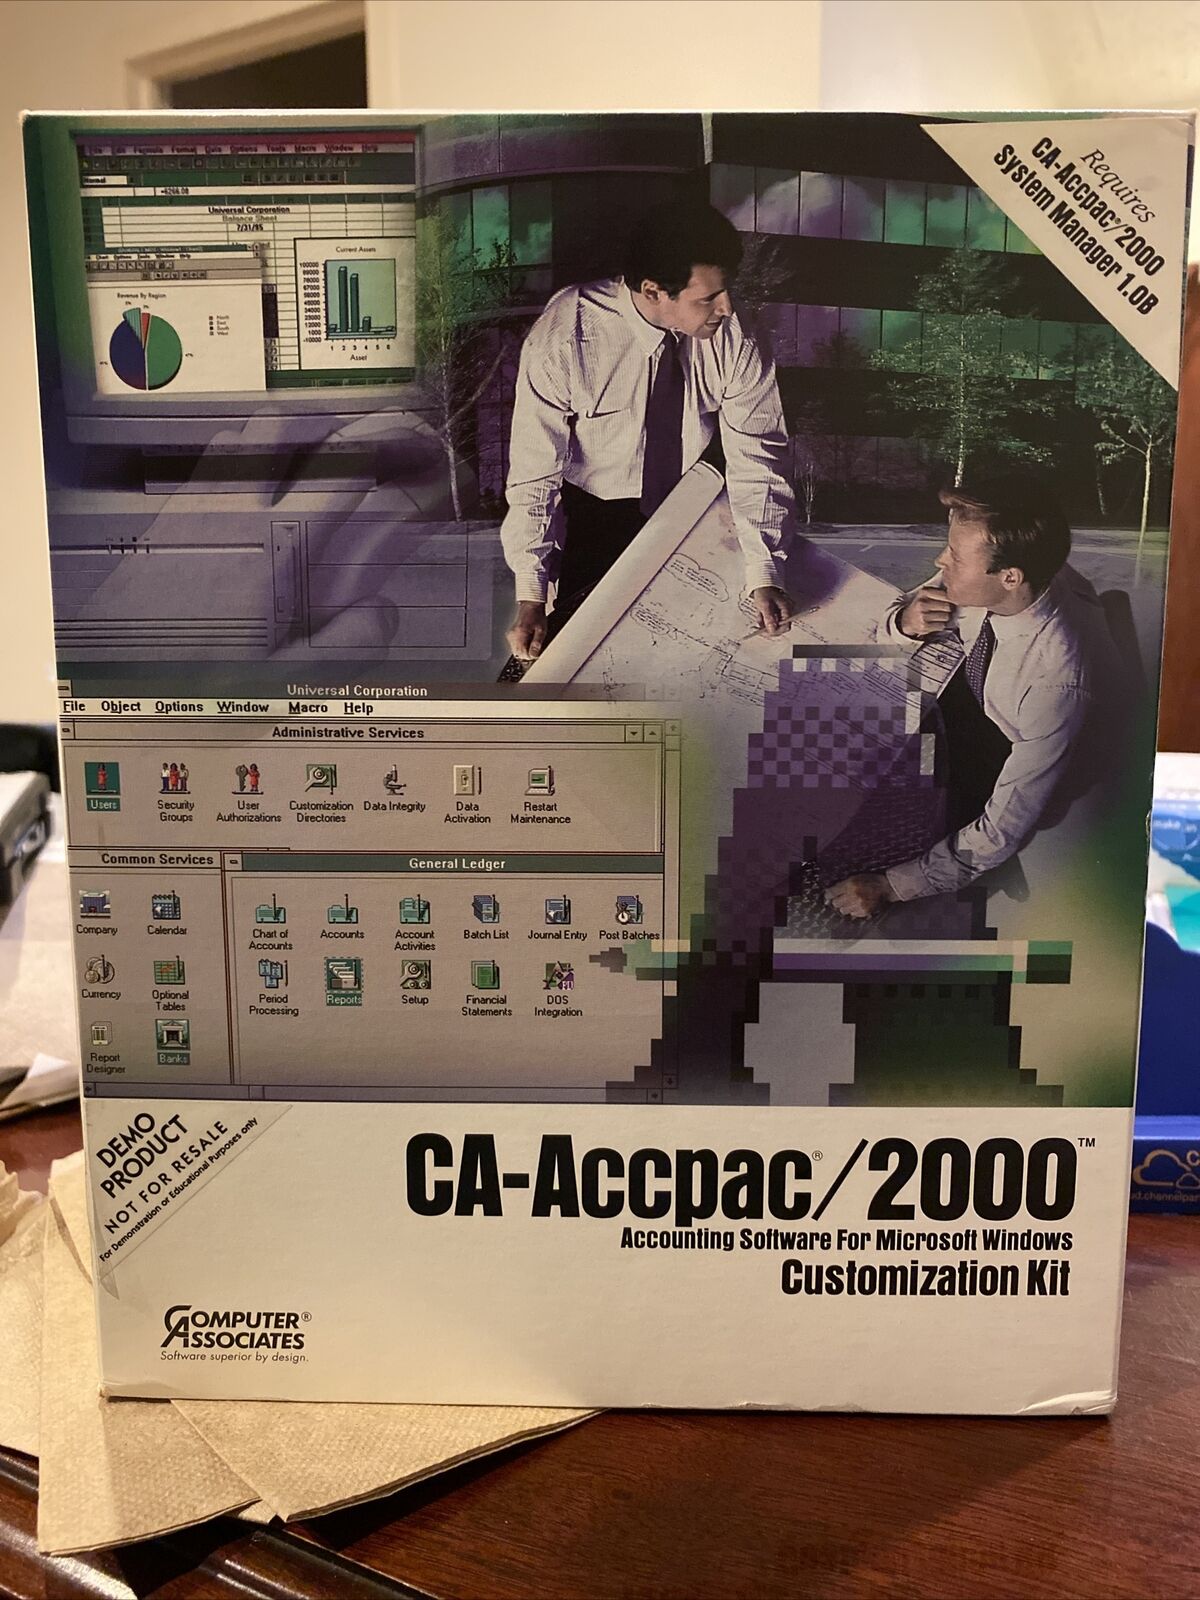 $2999 Brand New. Never Used Opened.CA-Accpac/2000 Customization Kit. Sealed Book